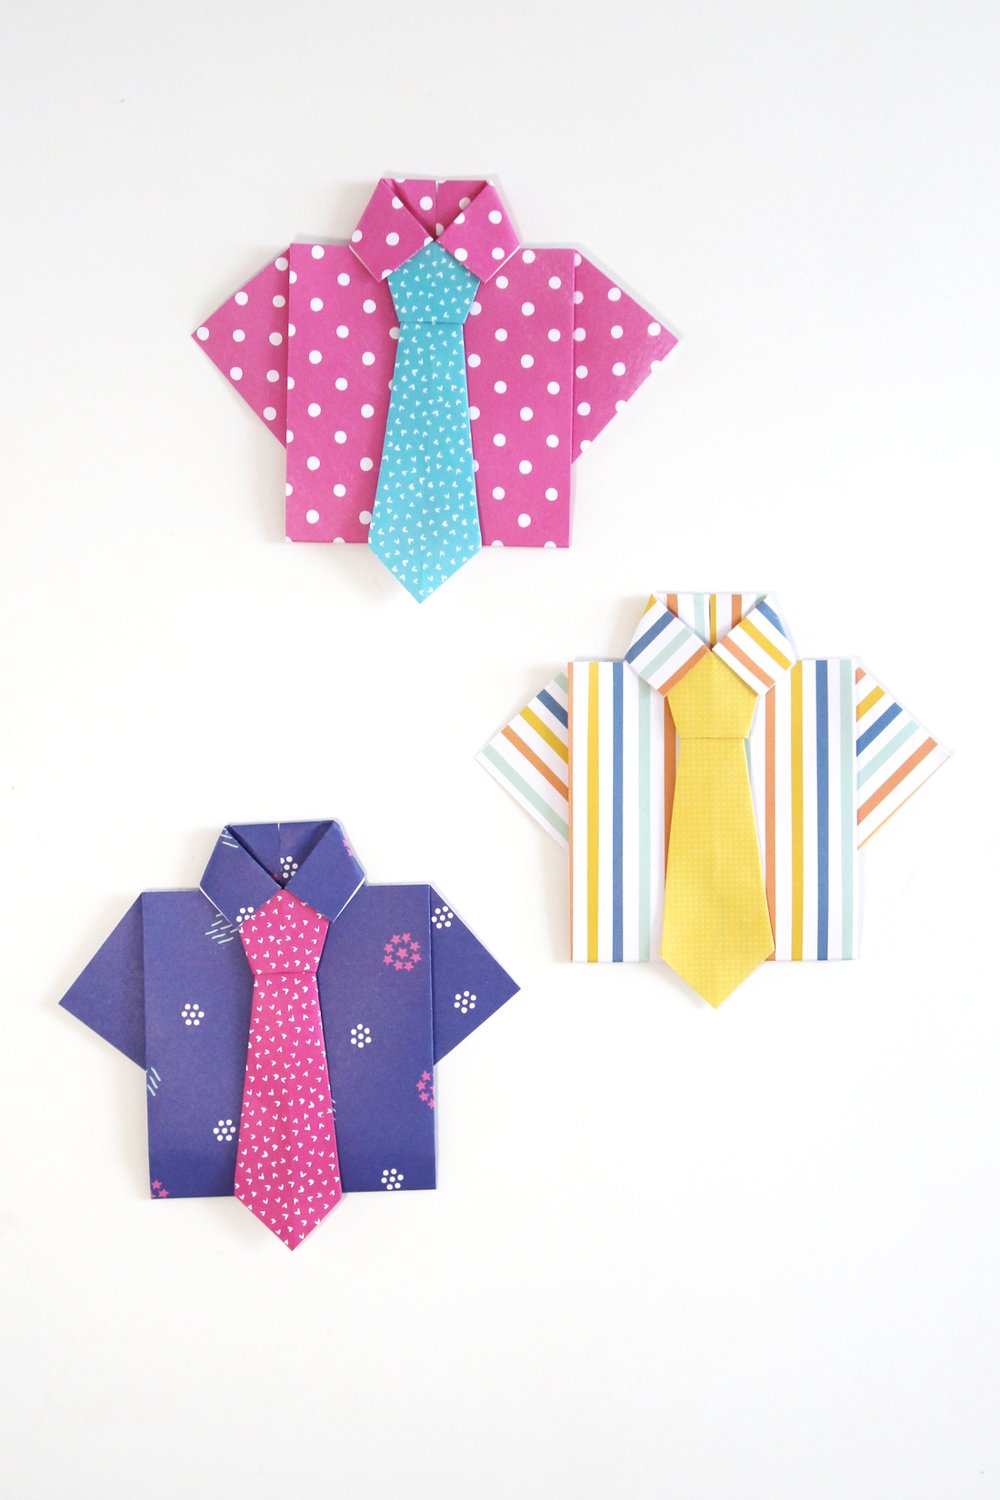 Three origami shirts and ties made out of brightly coloured patterned paper.